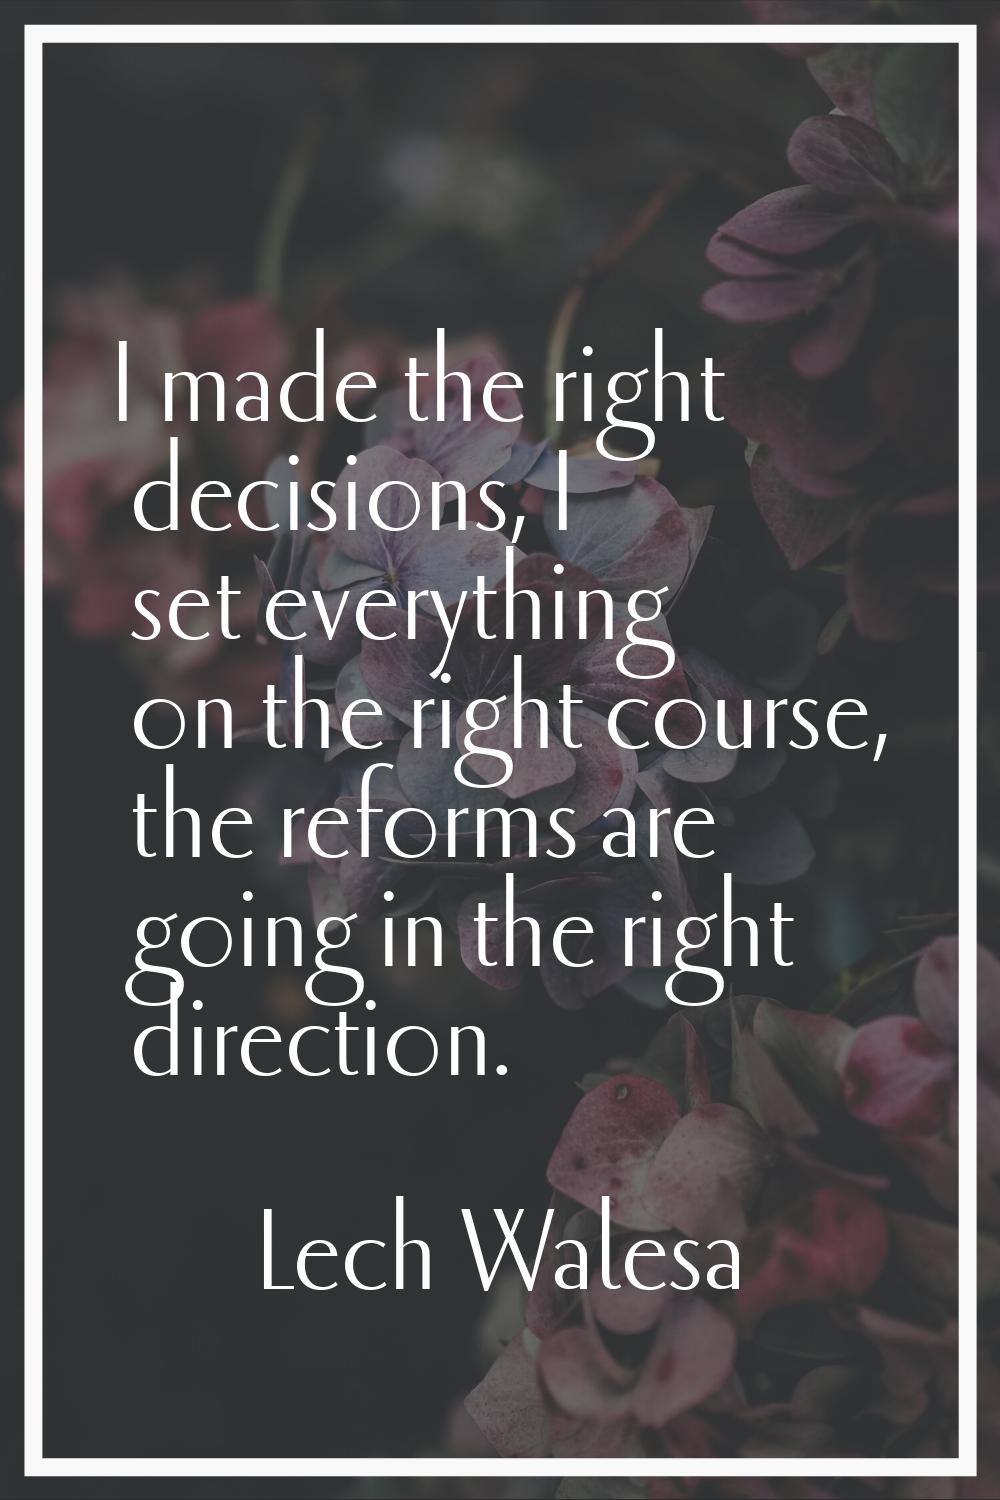 I made the right decisions, I set everything on the right course, the reforms are going in the righ